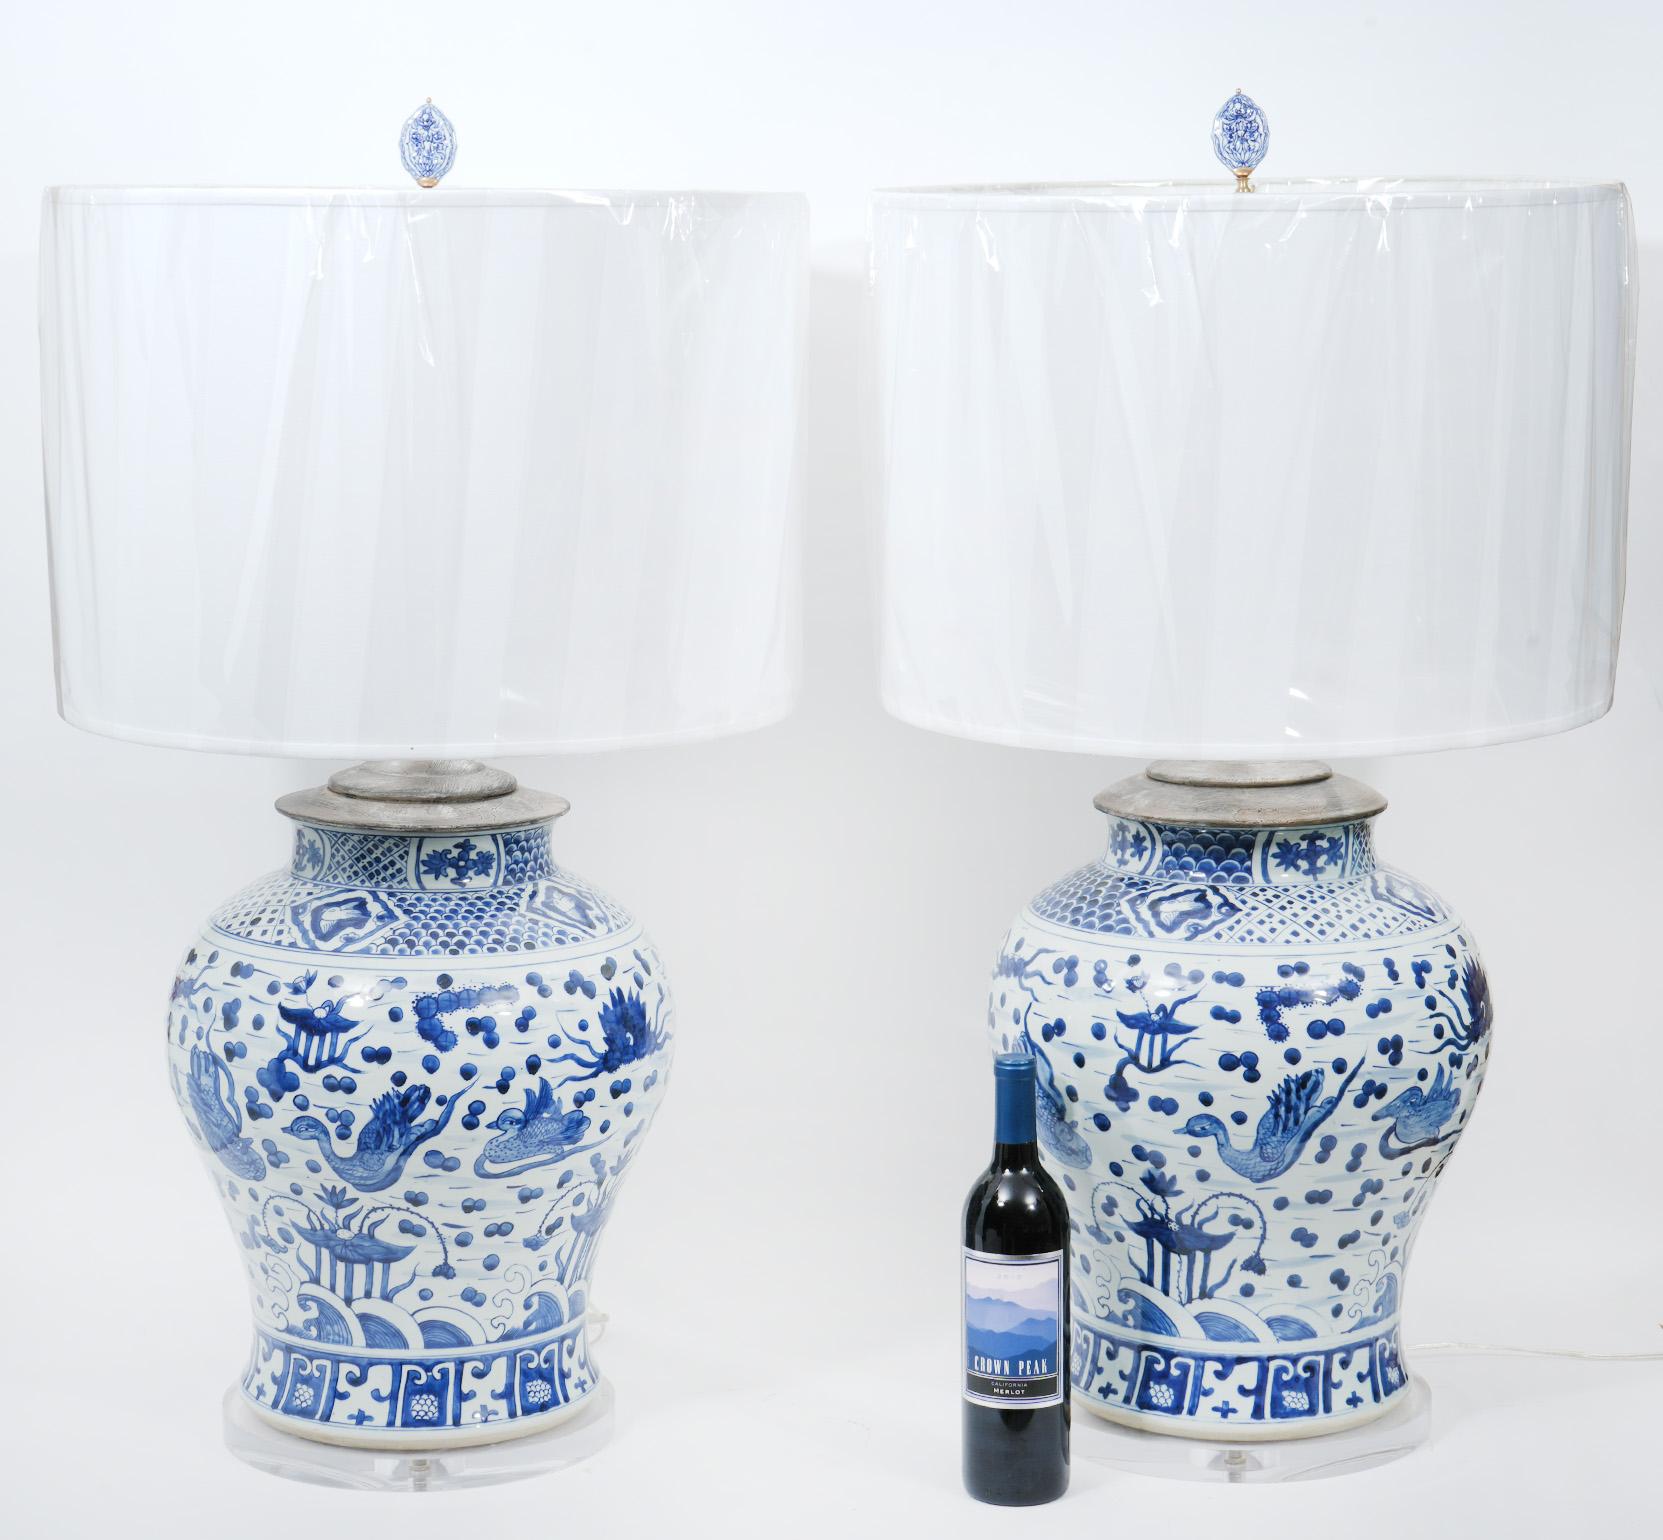 Pair of LARGE Antique Chinese Blue & White Porcelain Lamps In Excellent Condition For Sale In Ft. Lauderdale, FL